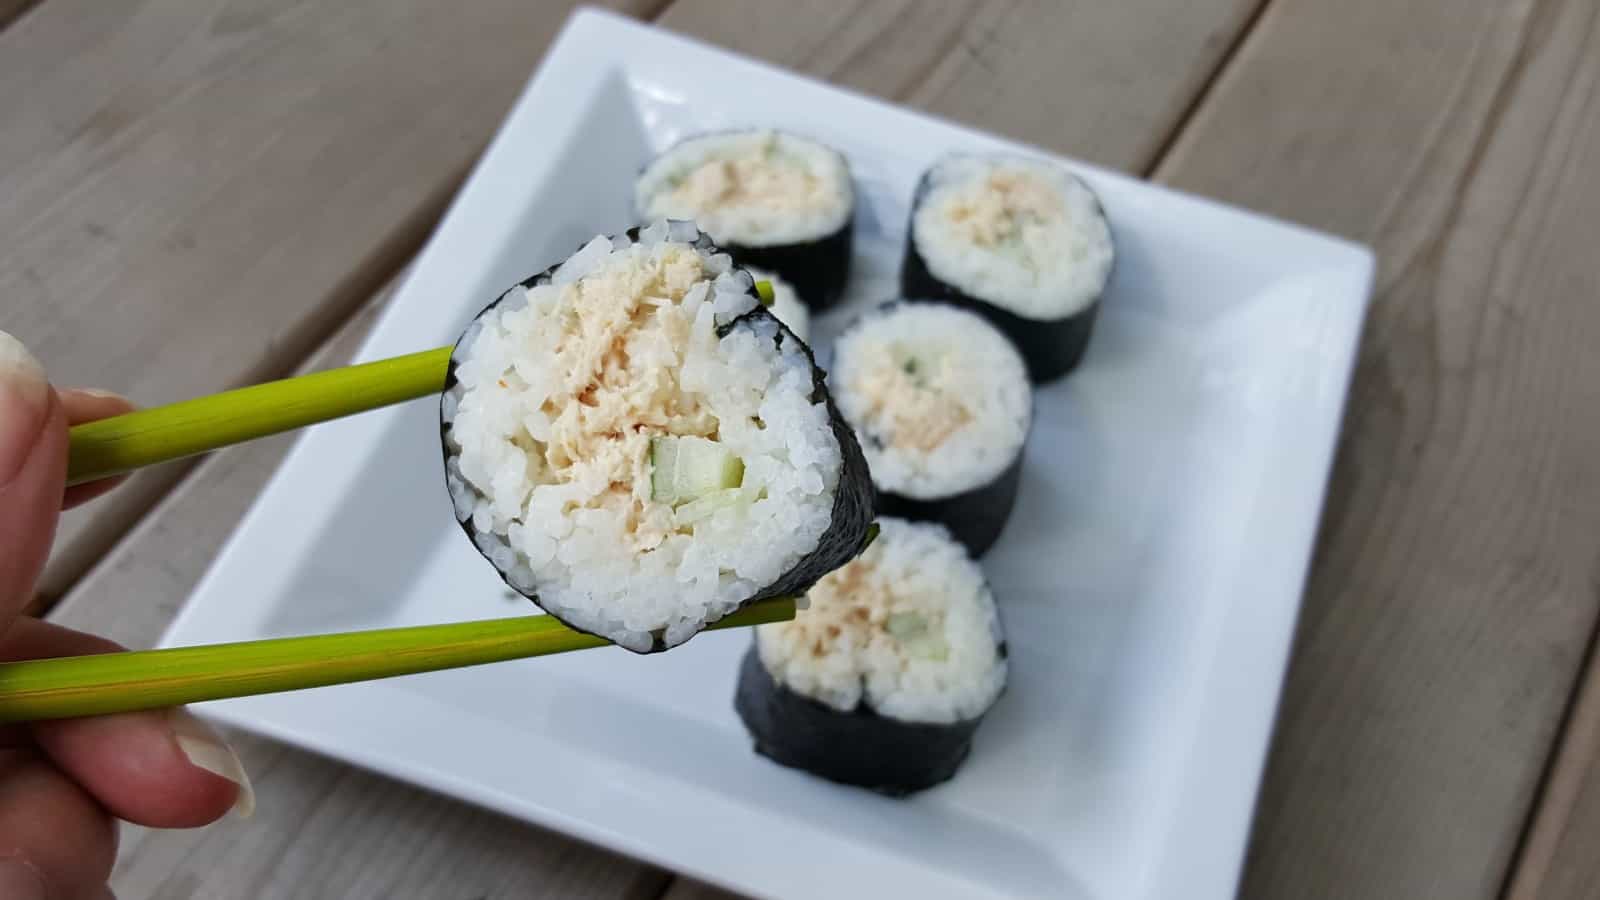 Image shows Chopsticks holding spicy tuna roll over a plate with more of the roll.